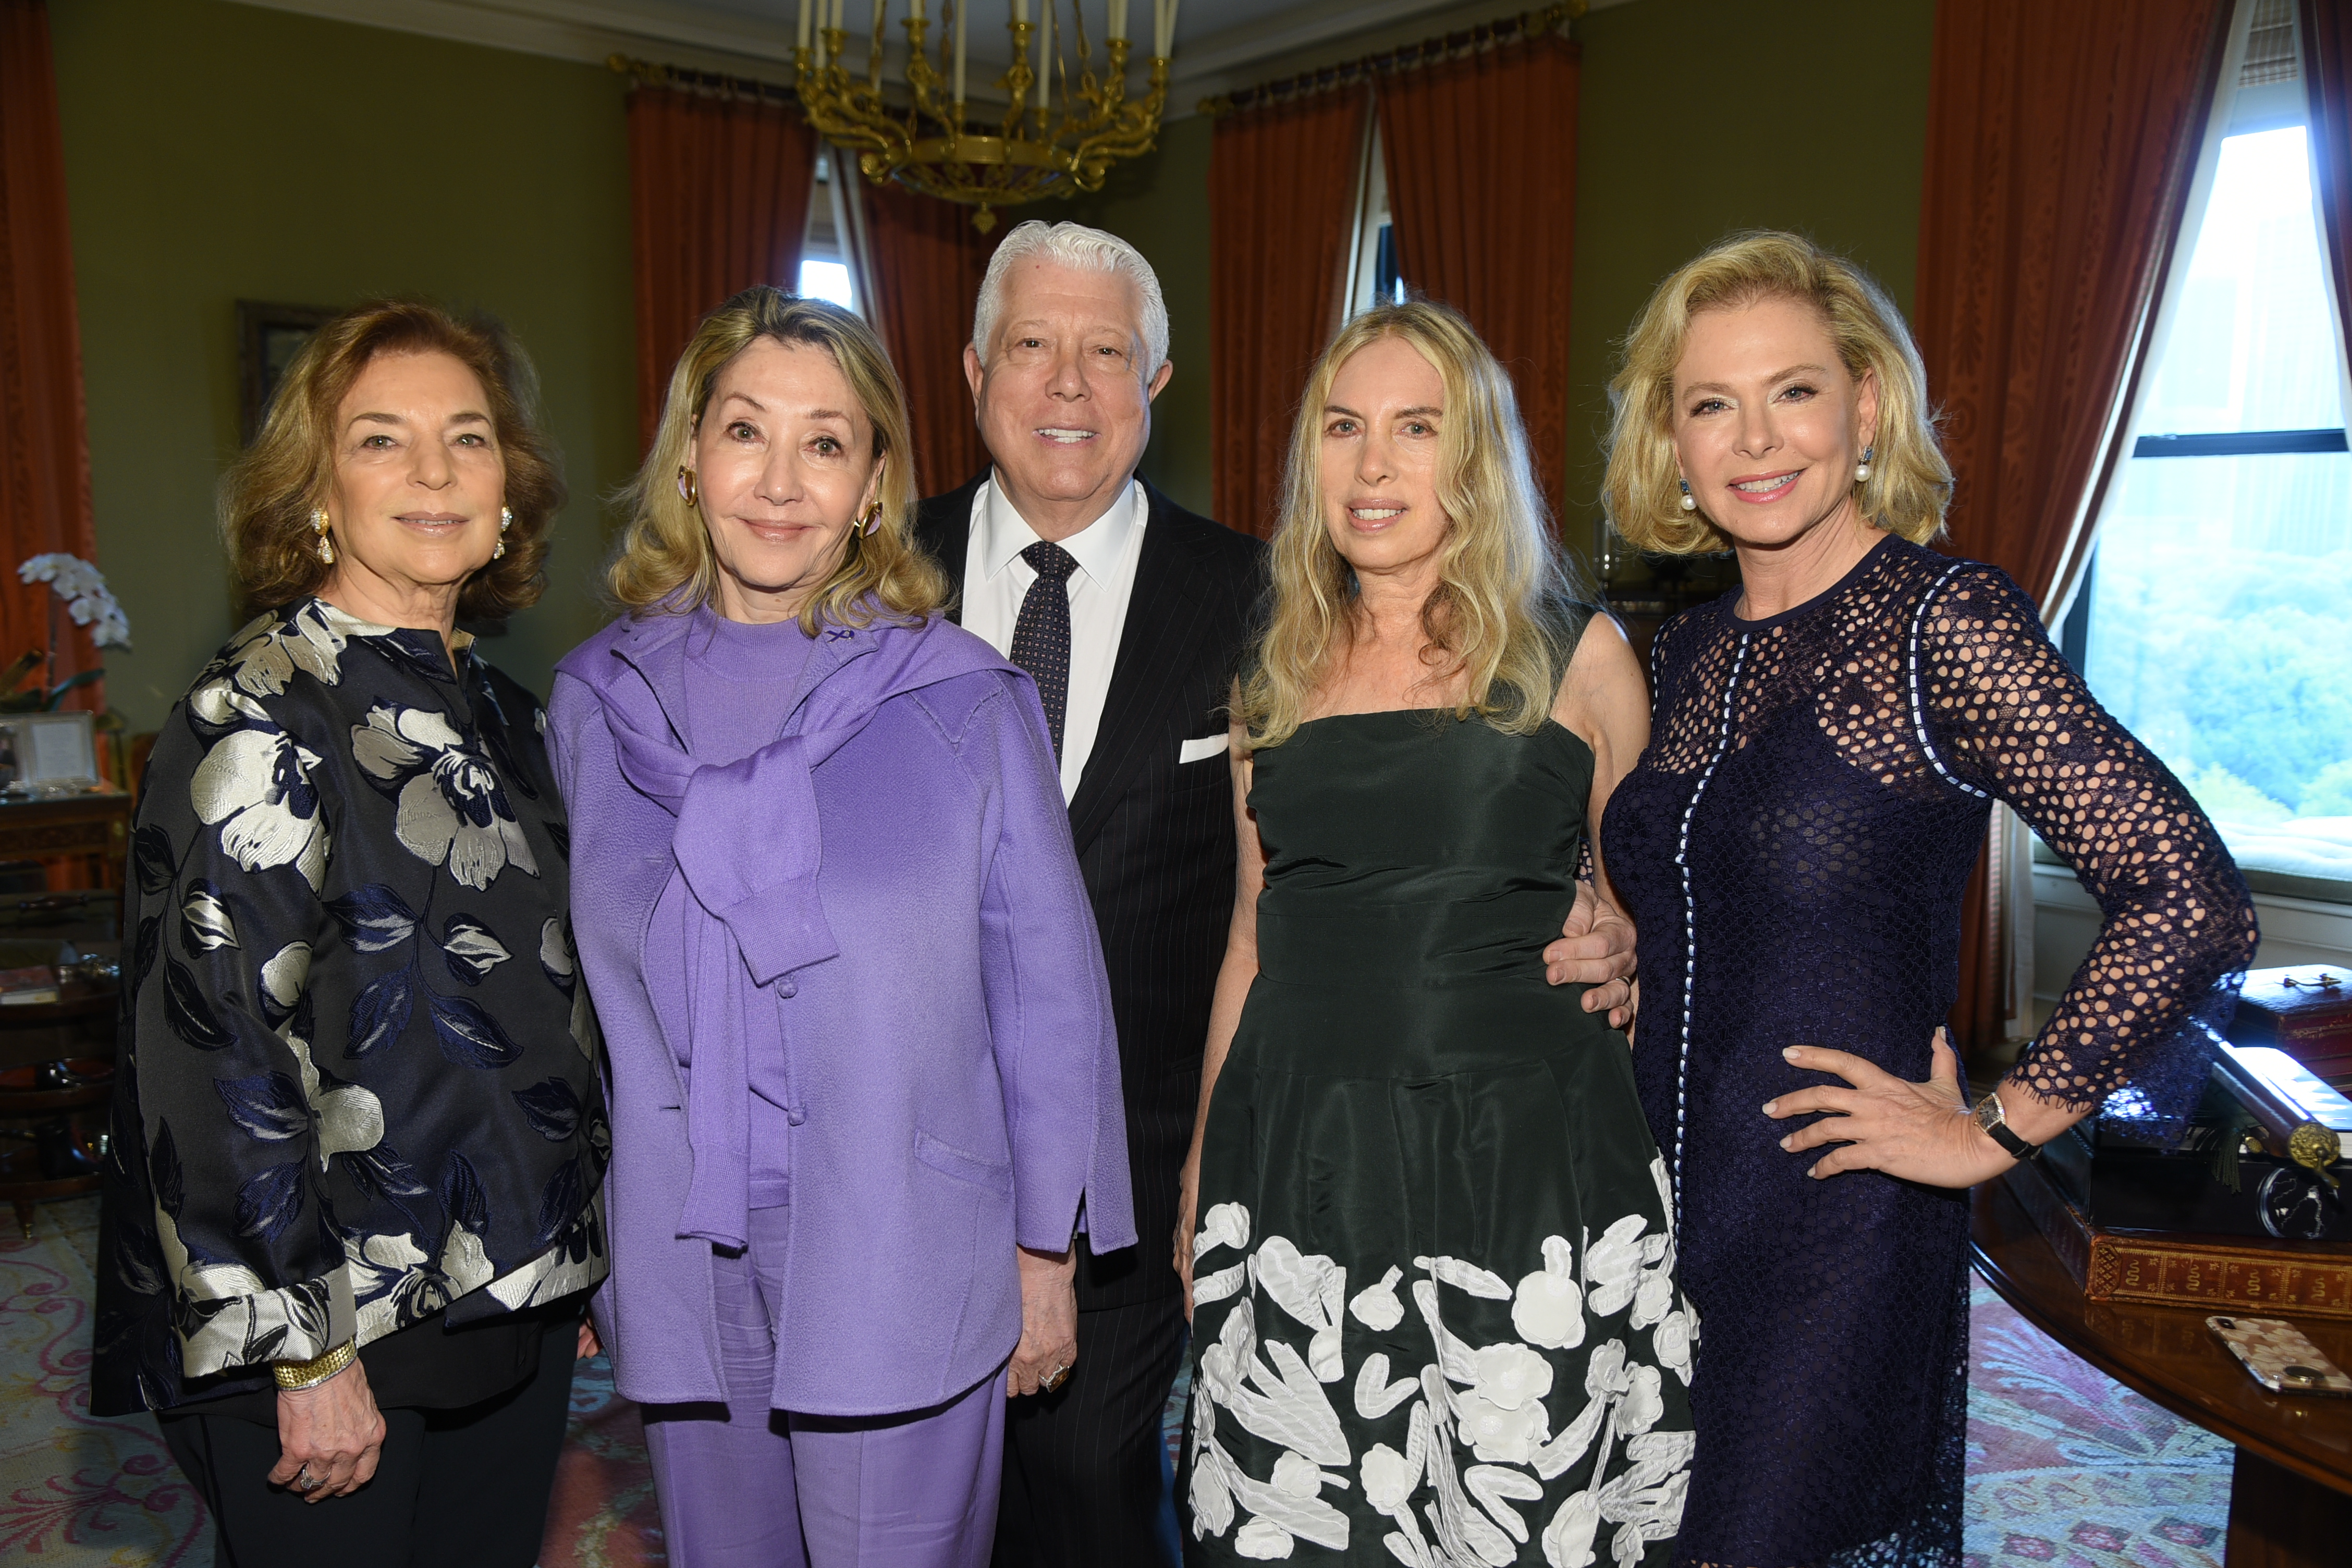 Ladies Lunch For Waxman’s Cancer Research | My Hamptons Guide4512 x 3008